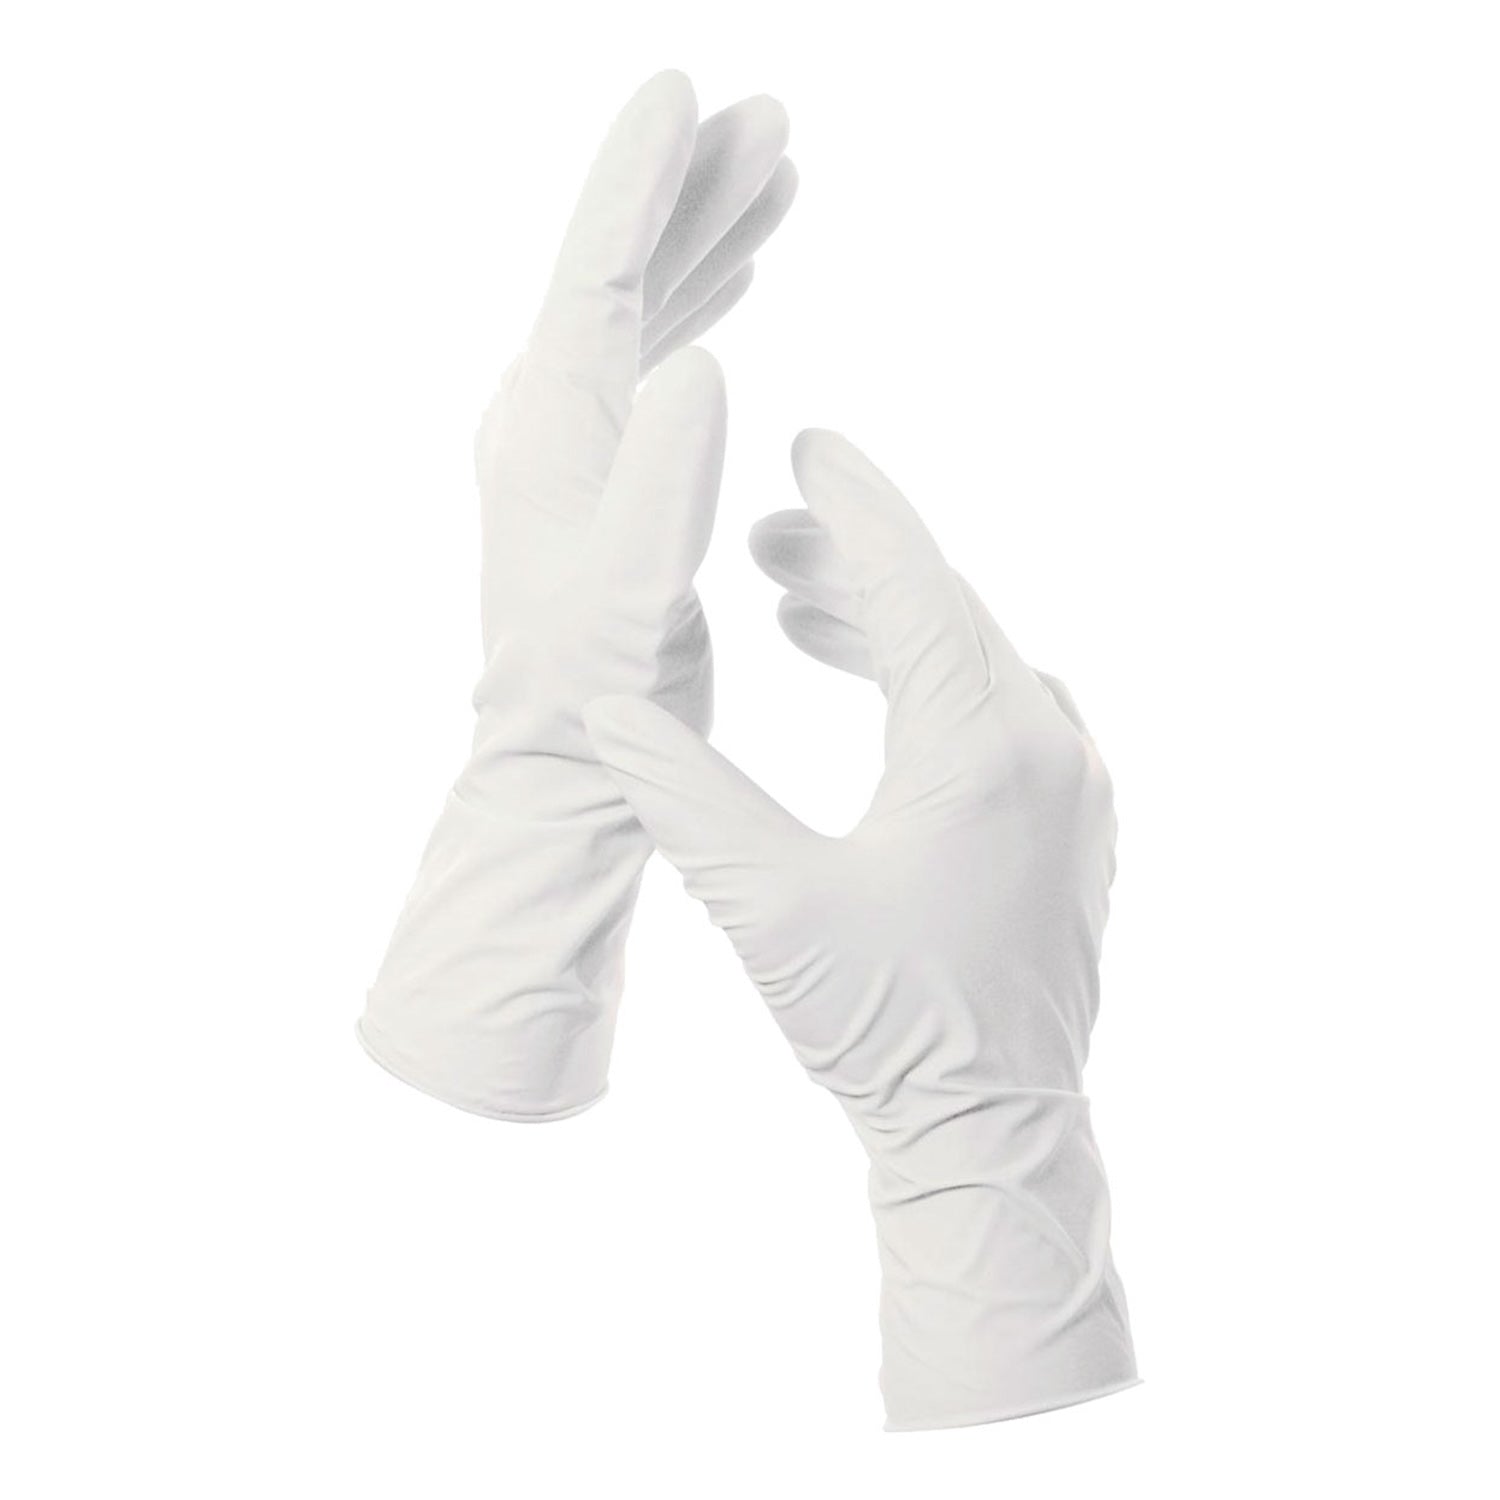 Premier Soft Vinyl Powder Free Gloves | Sterile | Latex Free | Small | Pack of 50 Pairs (2)